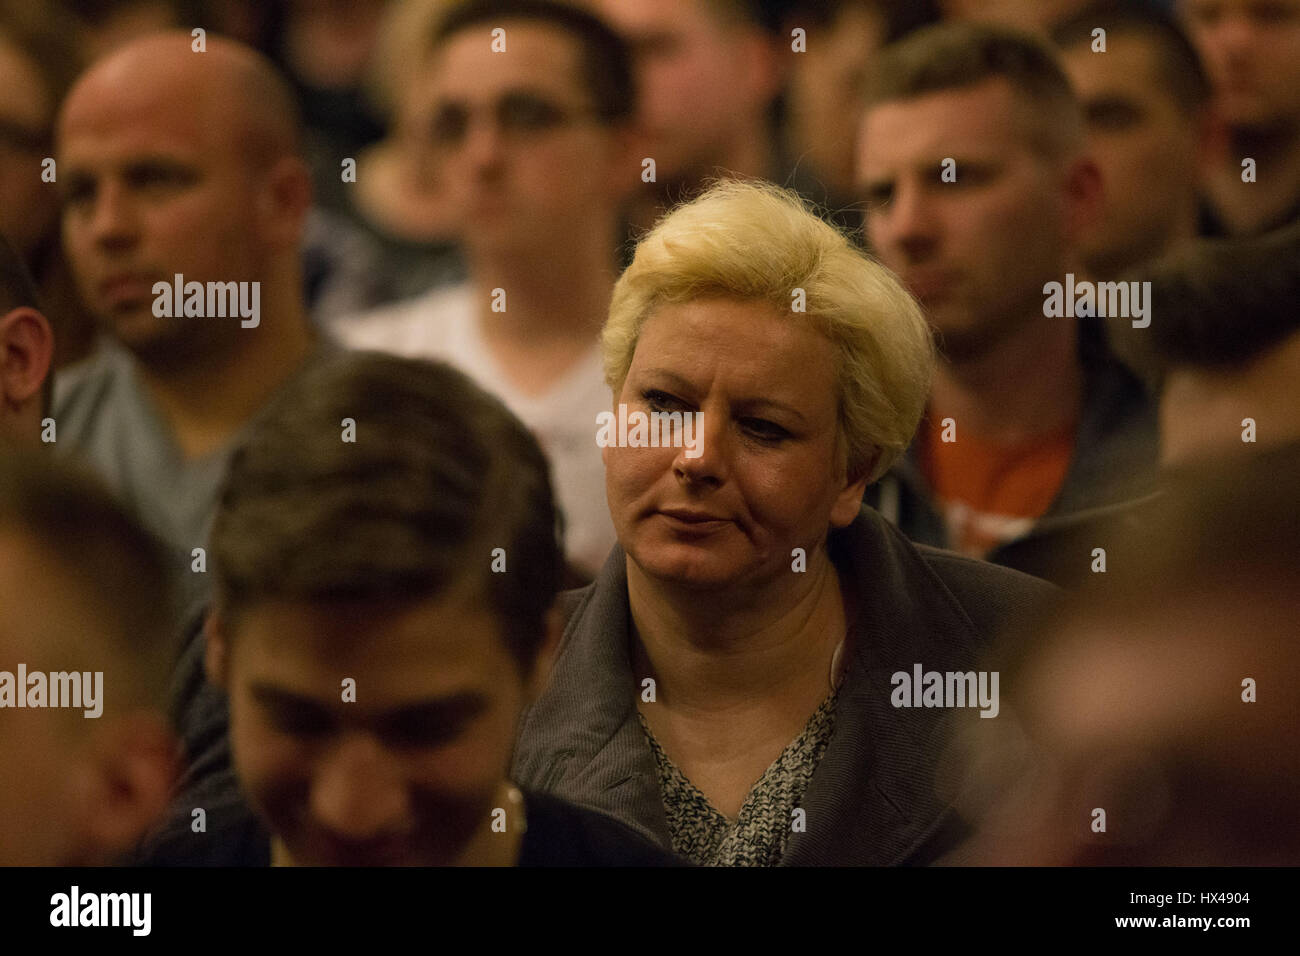 Bydgoszcz, Poland. 24th Mar, 2017. Bydgoszcz, Poland. March 25th, 2017. A woman is seen attending a talk by right wing MEP Janusz Korwin-Mikke. Mr Korwin-Mikke has been temporarily suspended from parliament after misogynist remarks in a debate on gender pay equality on March 1st. Credit: Jaap Arriens/Alamy Live News Stock Photo